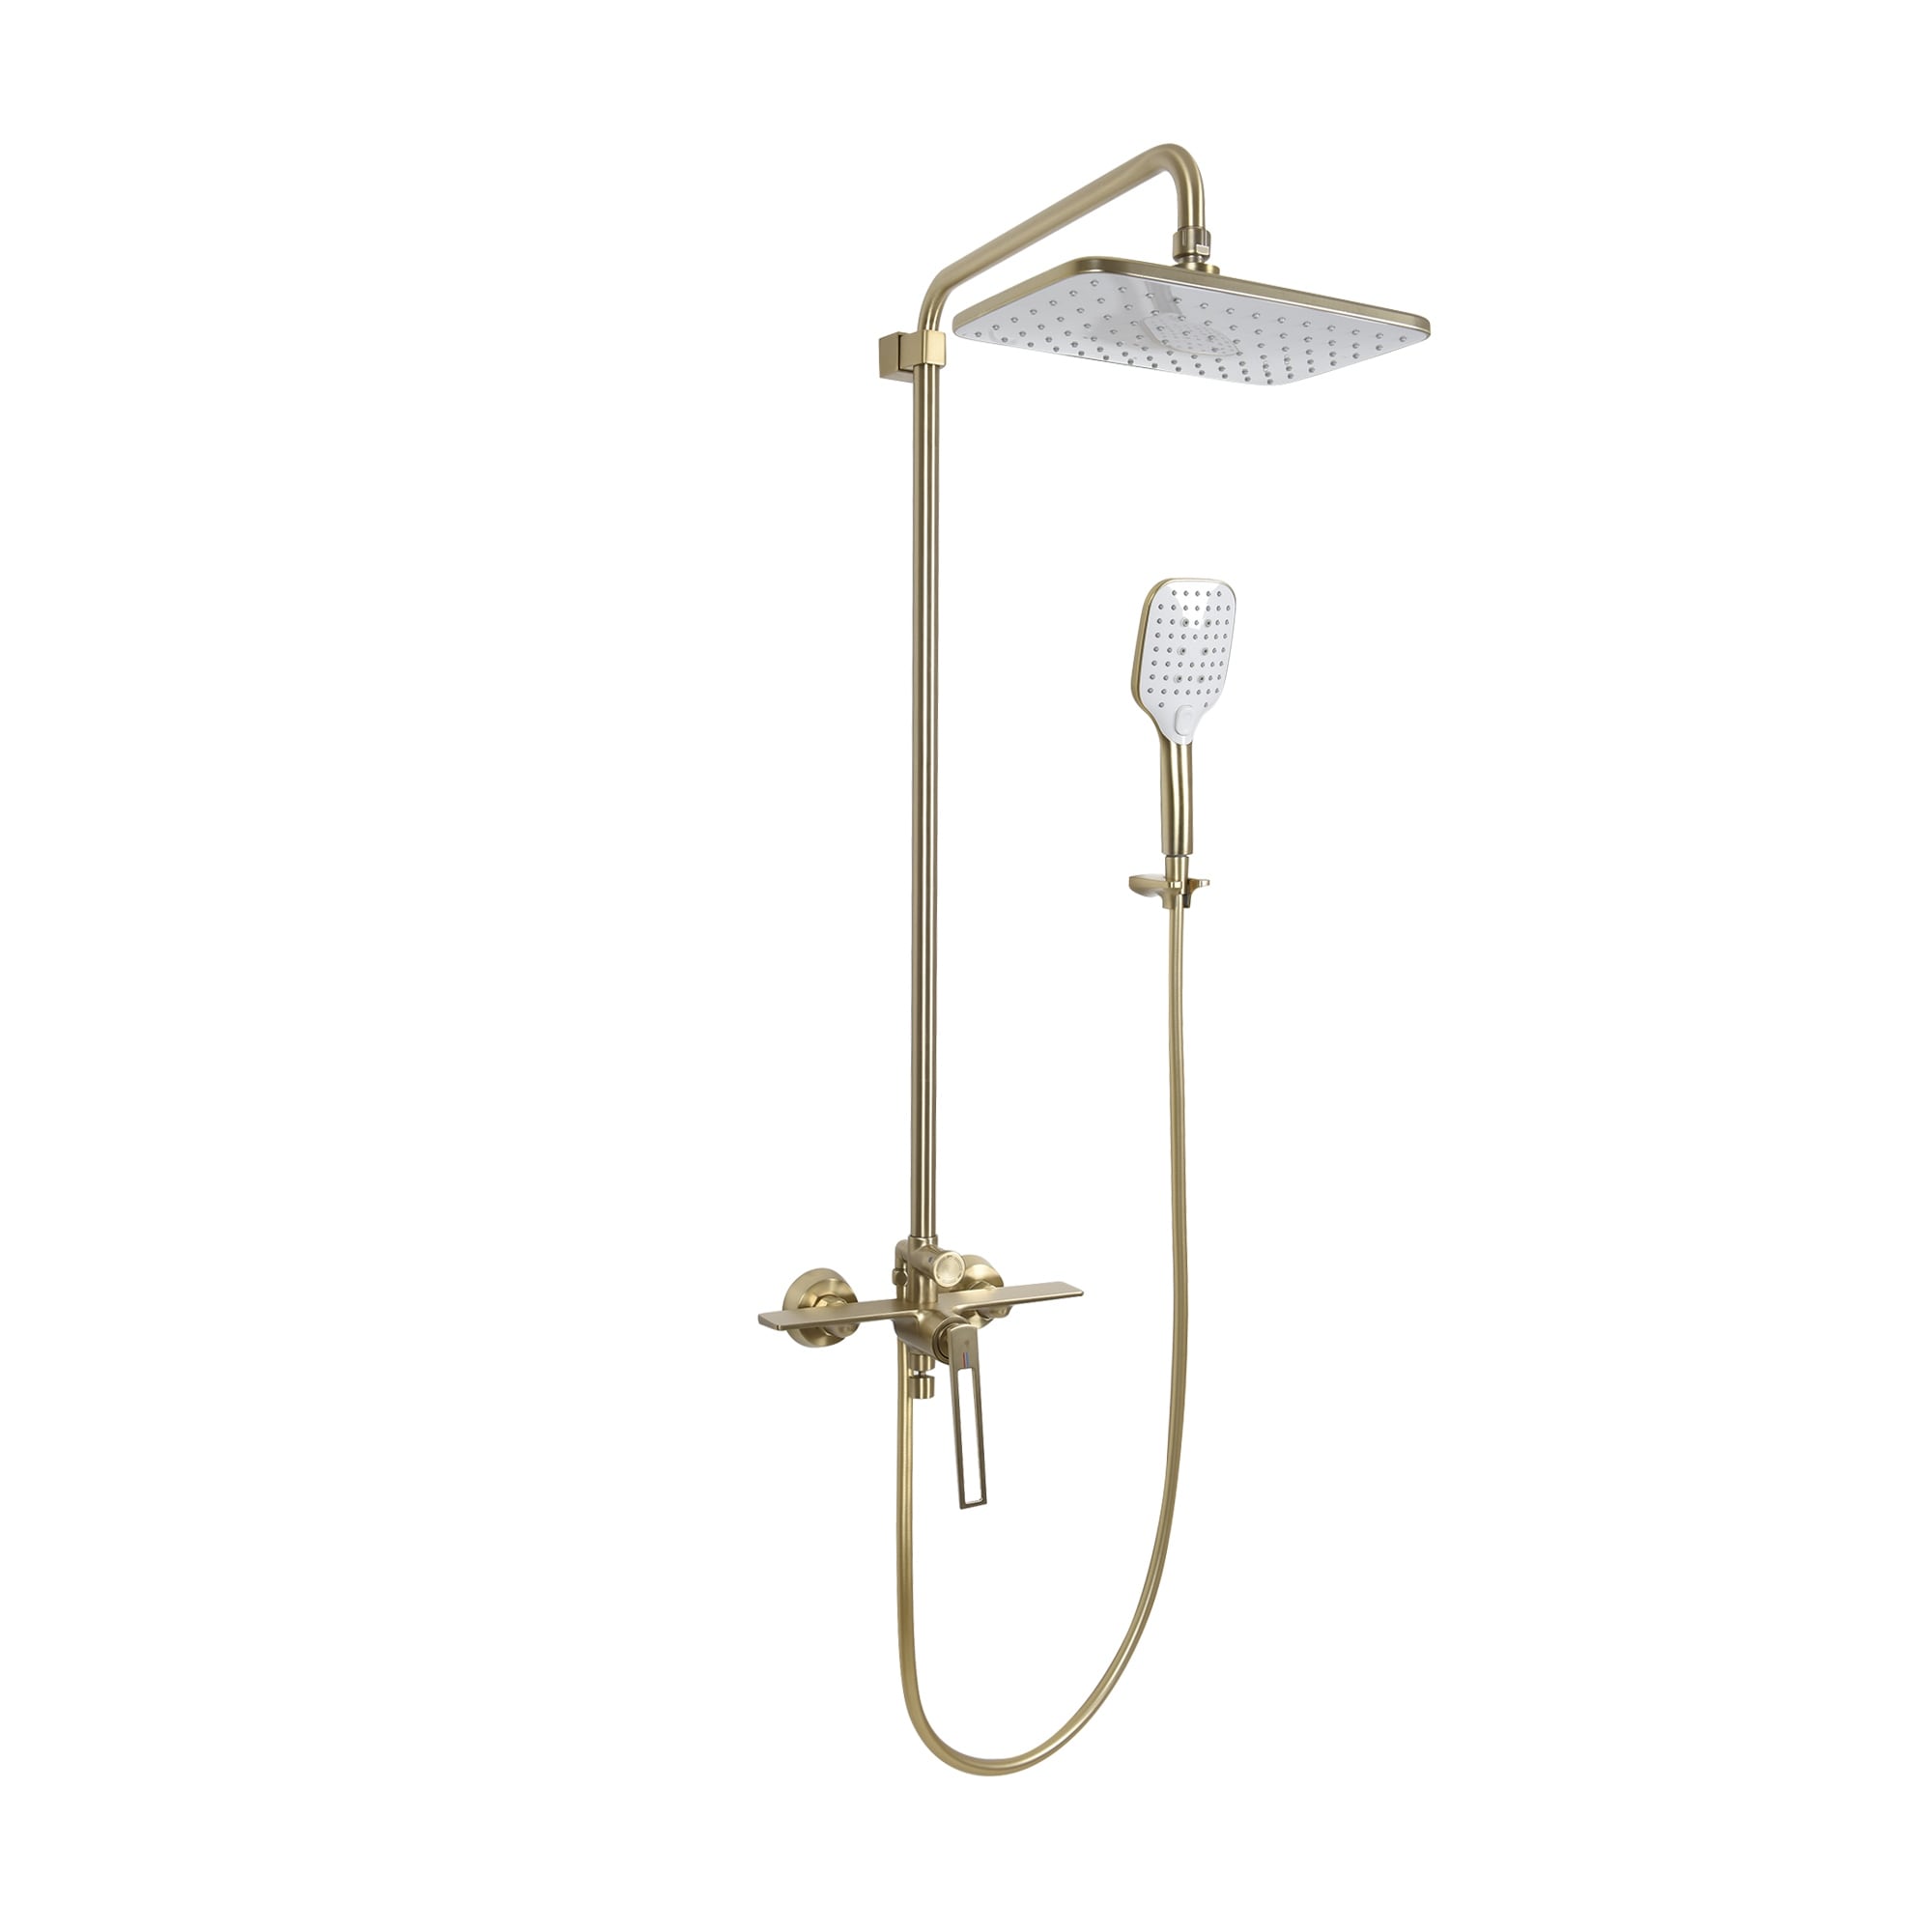 https://ak1.ostkcdn.com/images/products/is/images/direct/b471cd90692de86536a6b74f53058ffd63b1ba0f/Wall-Mounted-Complete-Shower-System-with-Rough-In-Valve.jpg